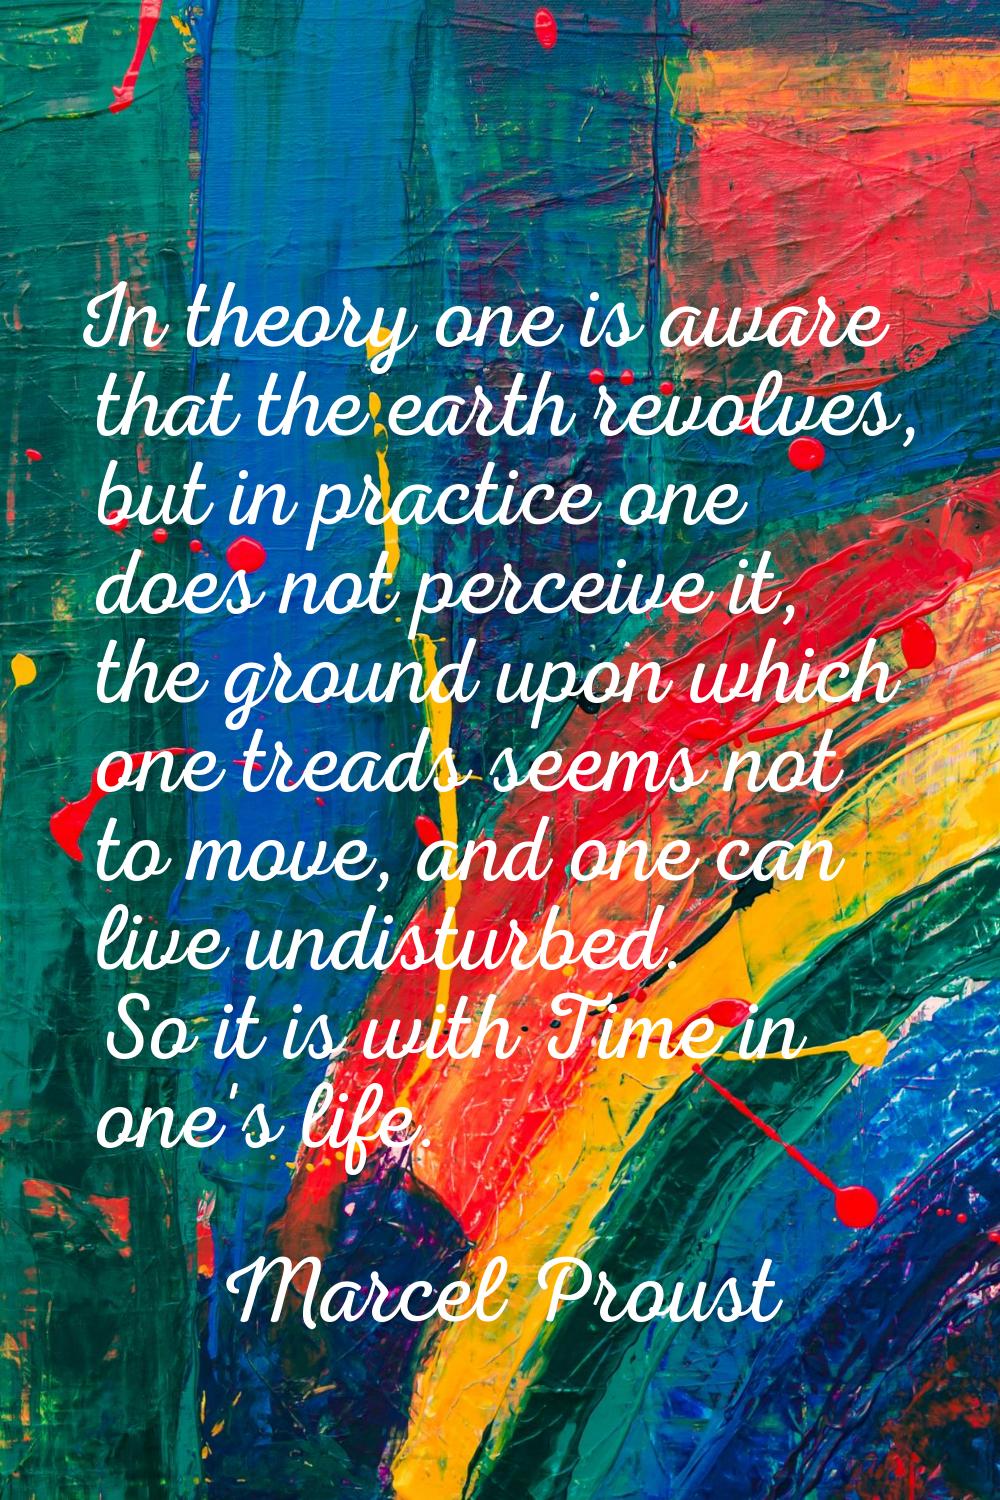 In theory one is aware that the earth revolves, but in practice one does not perceive it, the groun